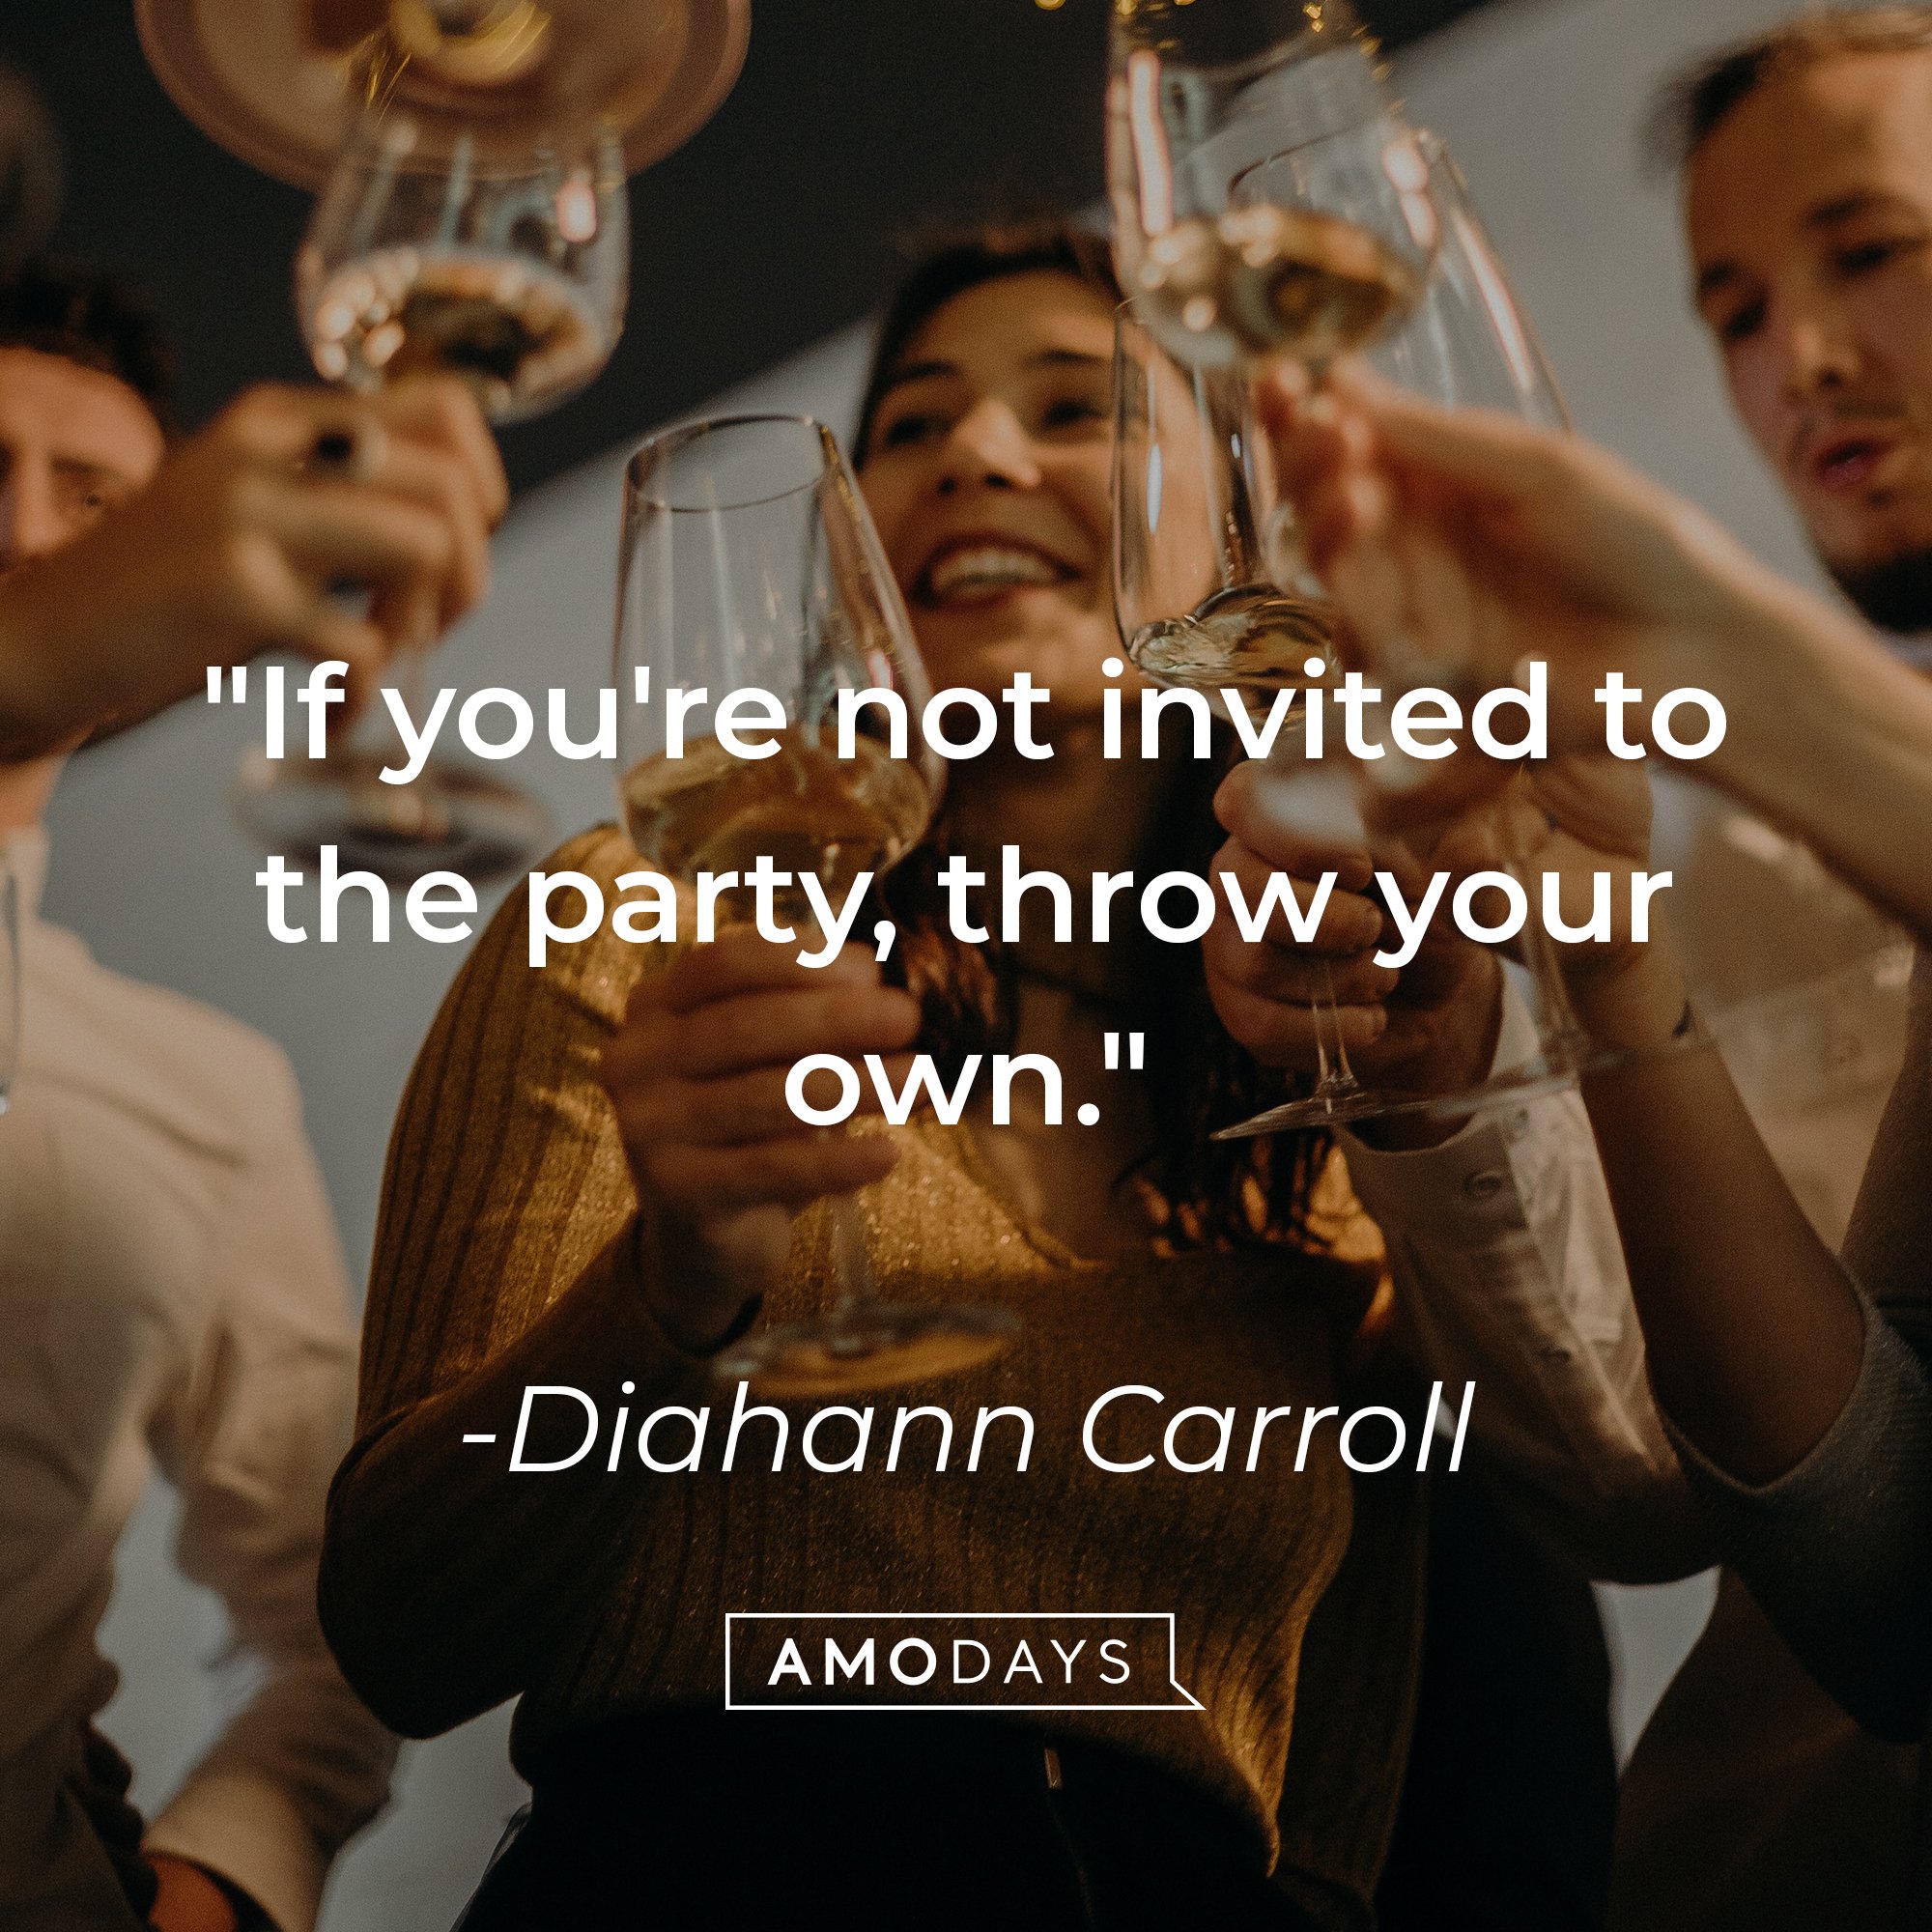 Diahann Carroll's quote: "If you're not invited to the party, throw your own."  | Image: AmoDays